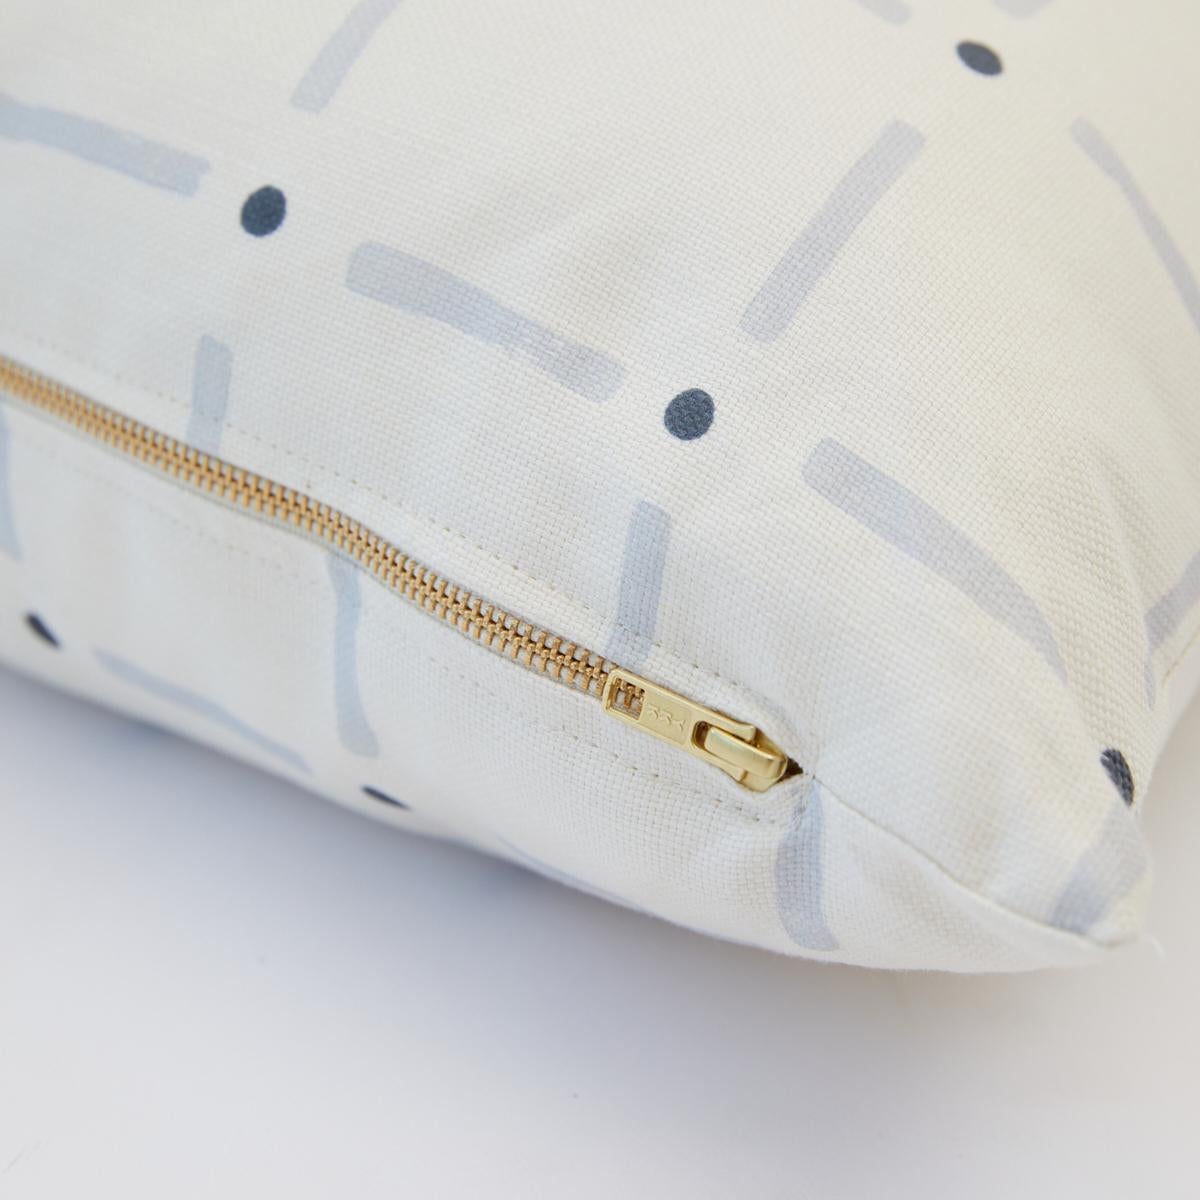 This pillow features Drifting Grid by Caroline Z Hurley with a knife edge finish. Our Drifting Grid pillow is a playful take on plaid – a perfect blend of tradition and whimsy. Our petal colorway marries a subtle blush with accents earthy